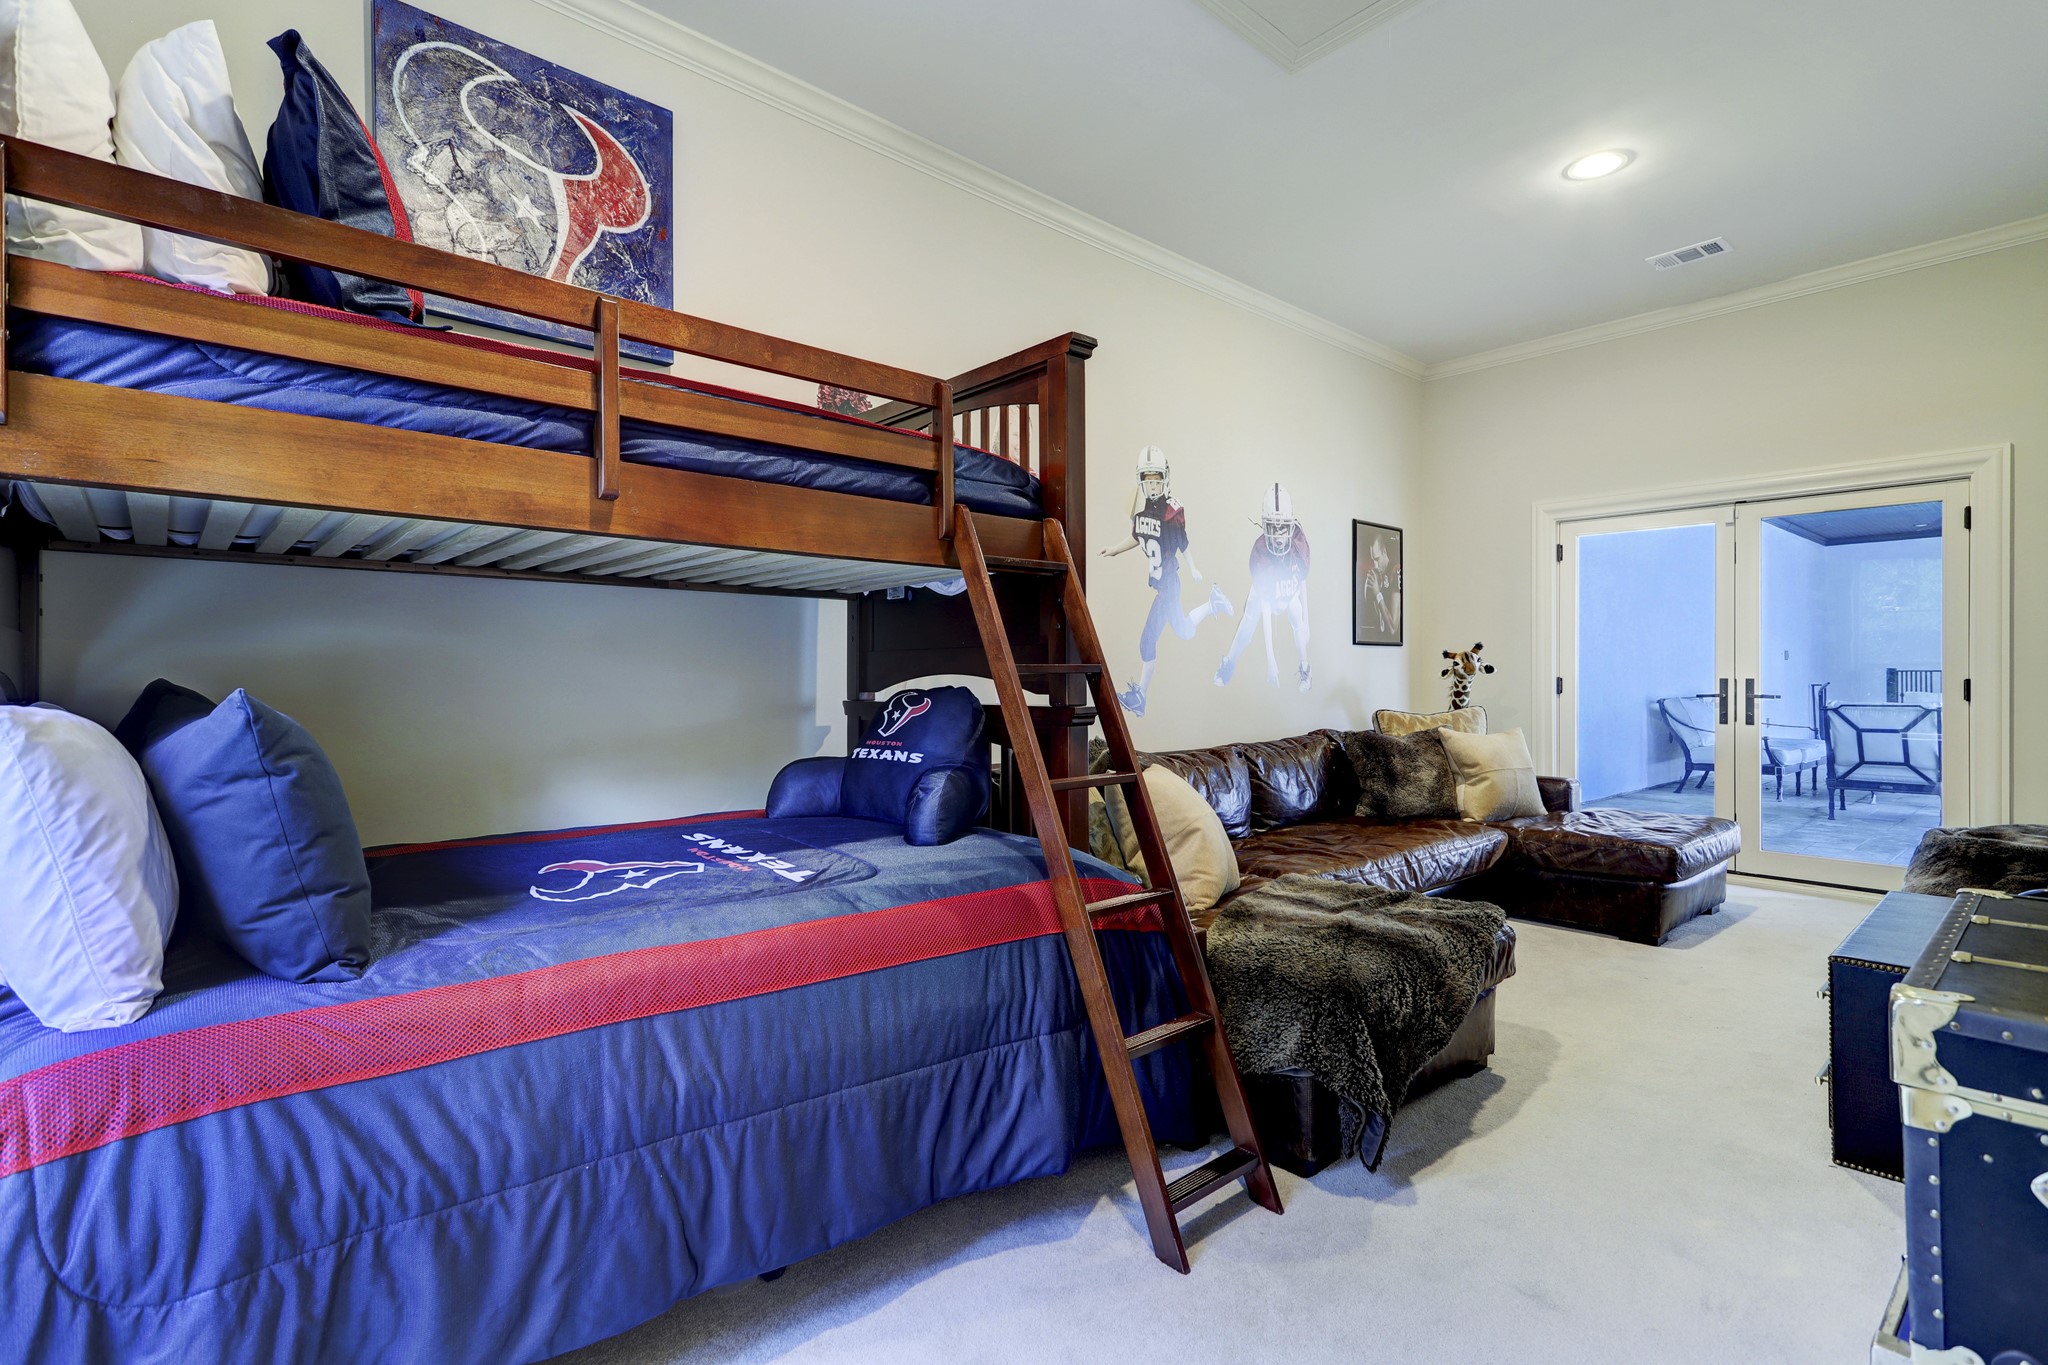 This fun bedroom is located off the back of the home on the second floor with access to the second floor patio overlooking the pool/spa and a seperate staircase leading to one of the garages - making it a ideal live in residence or extended family.